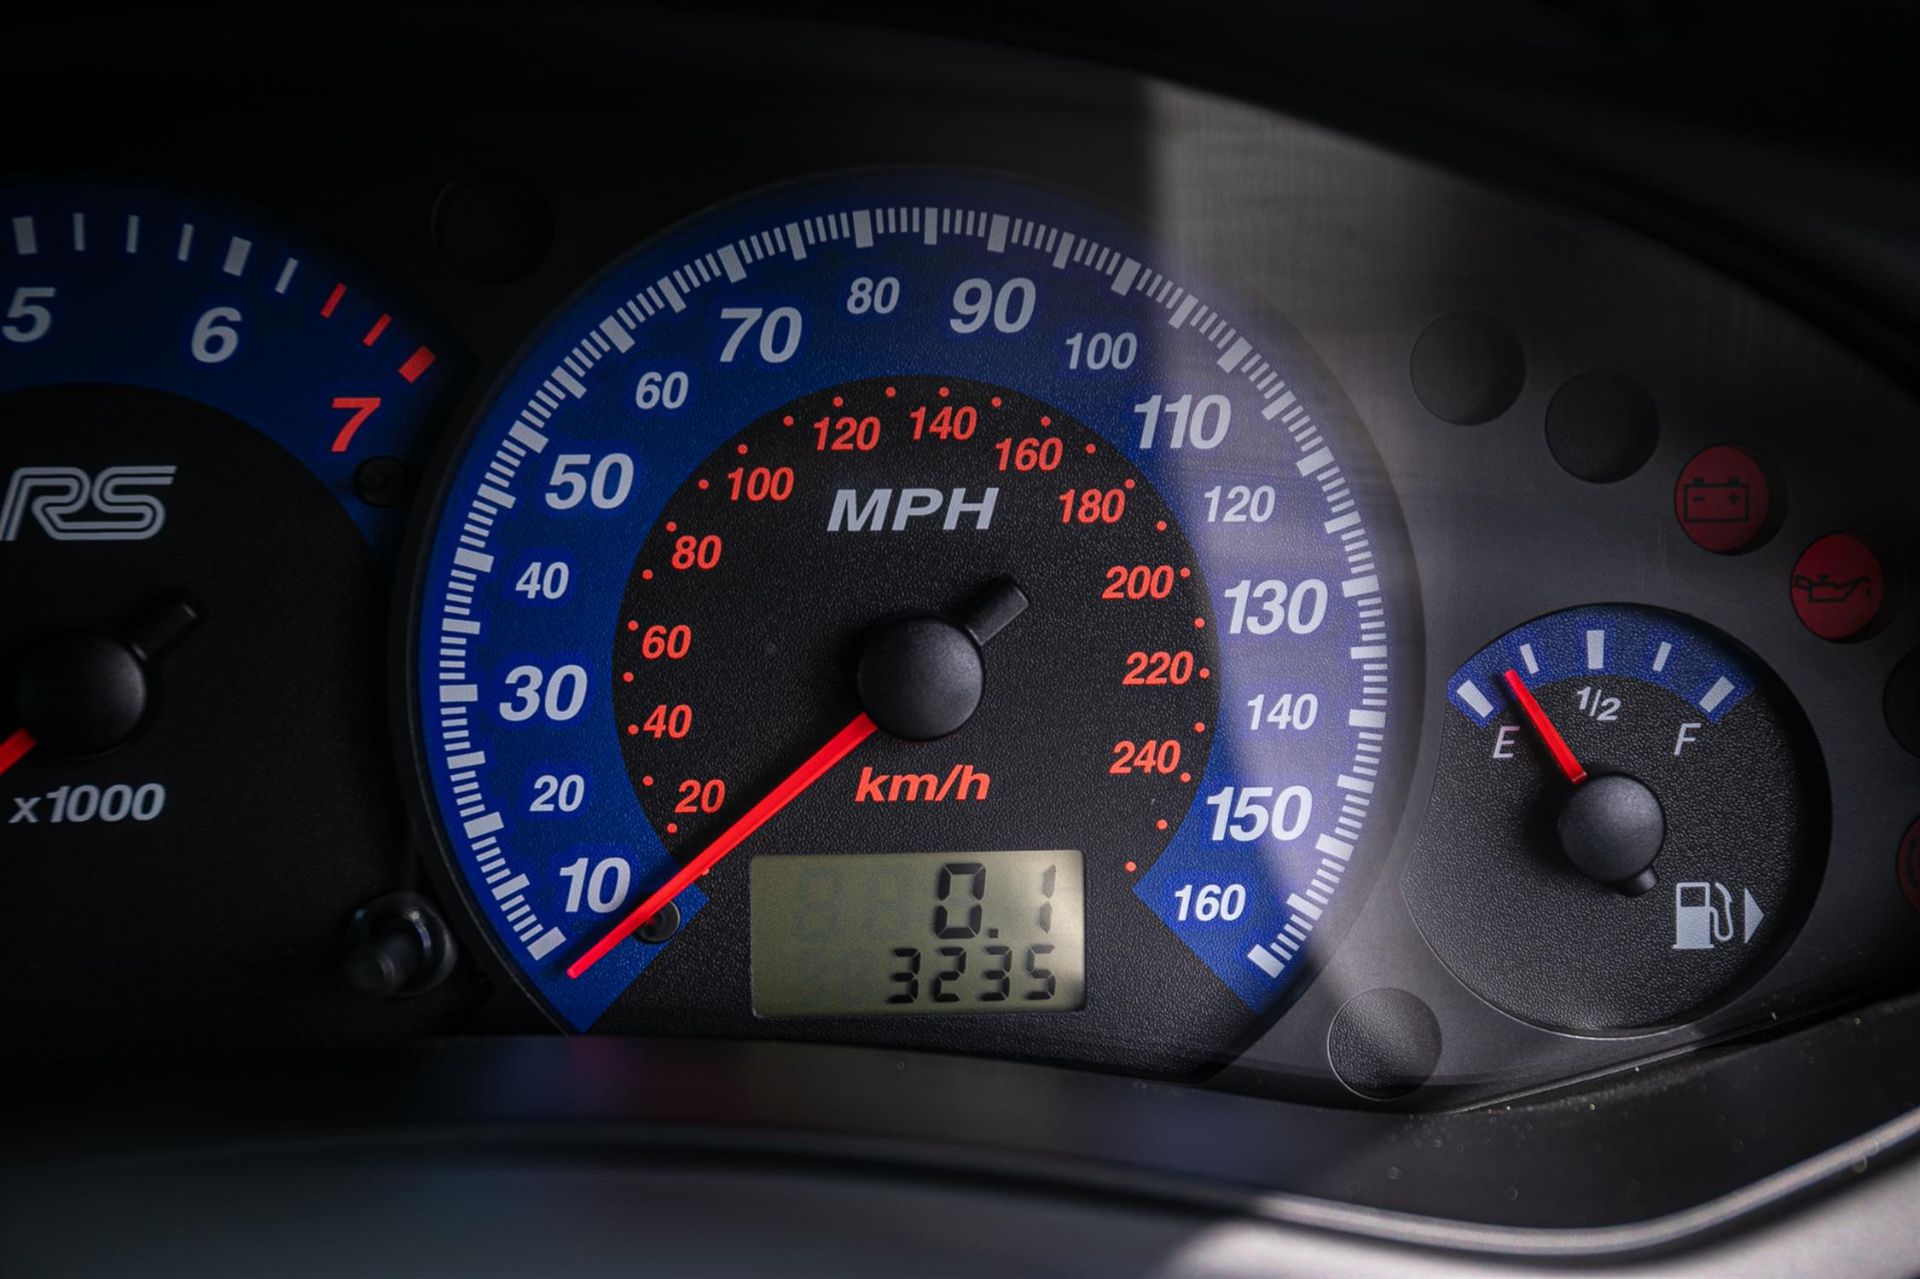 2003 Ford Focus RS Mk1 - 3265 Miles - Image 10 of 10